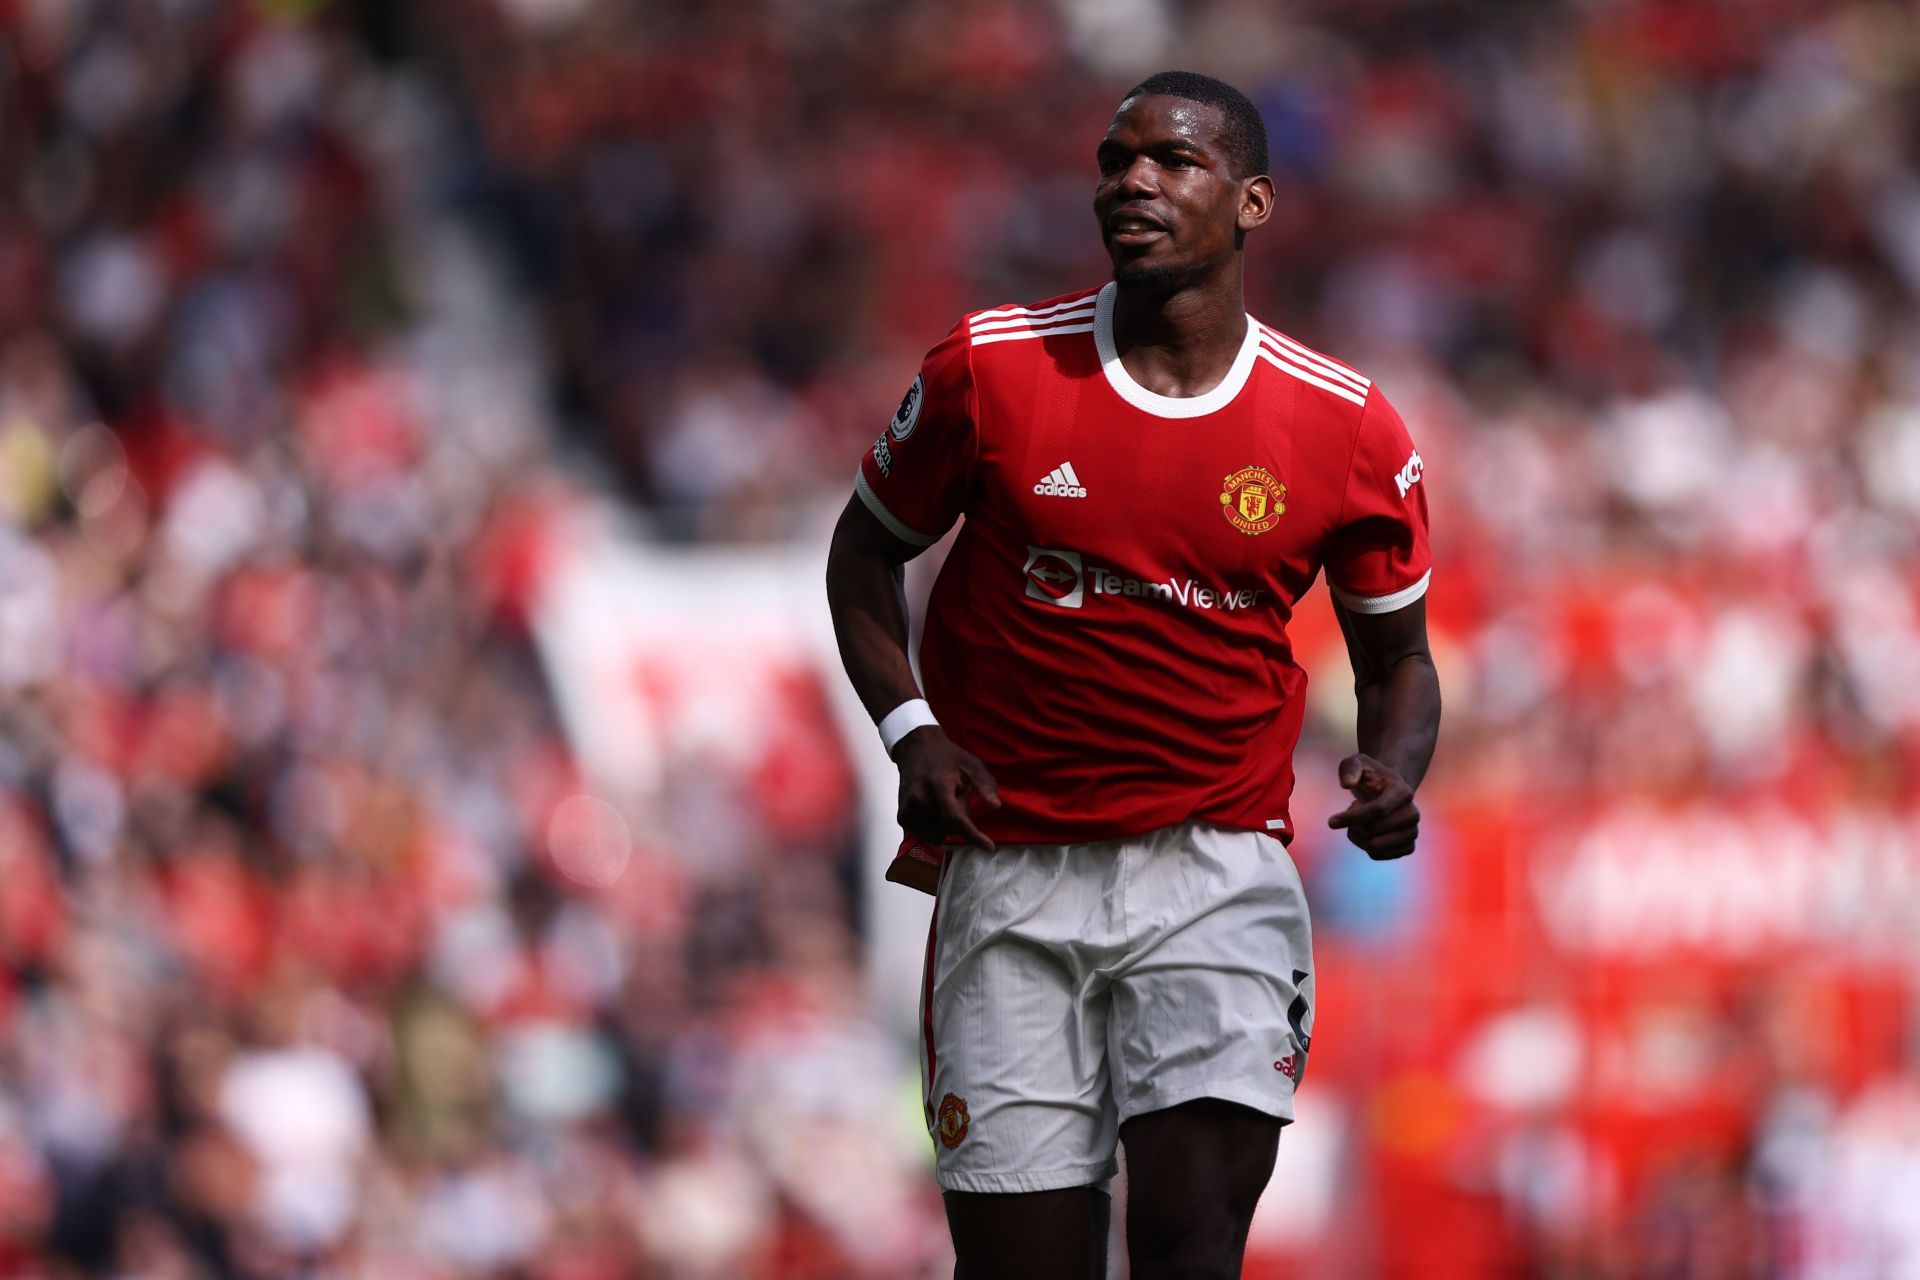 Pogba is one of the best midfielders in the world